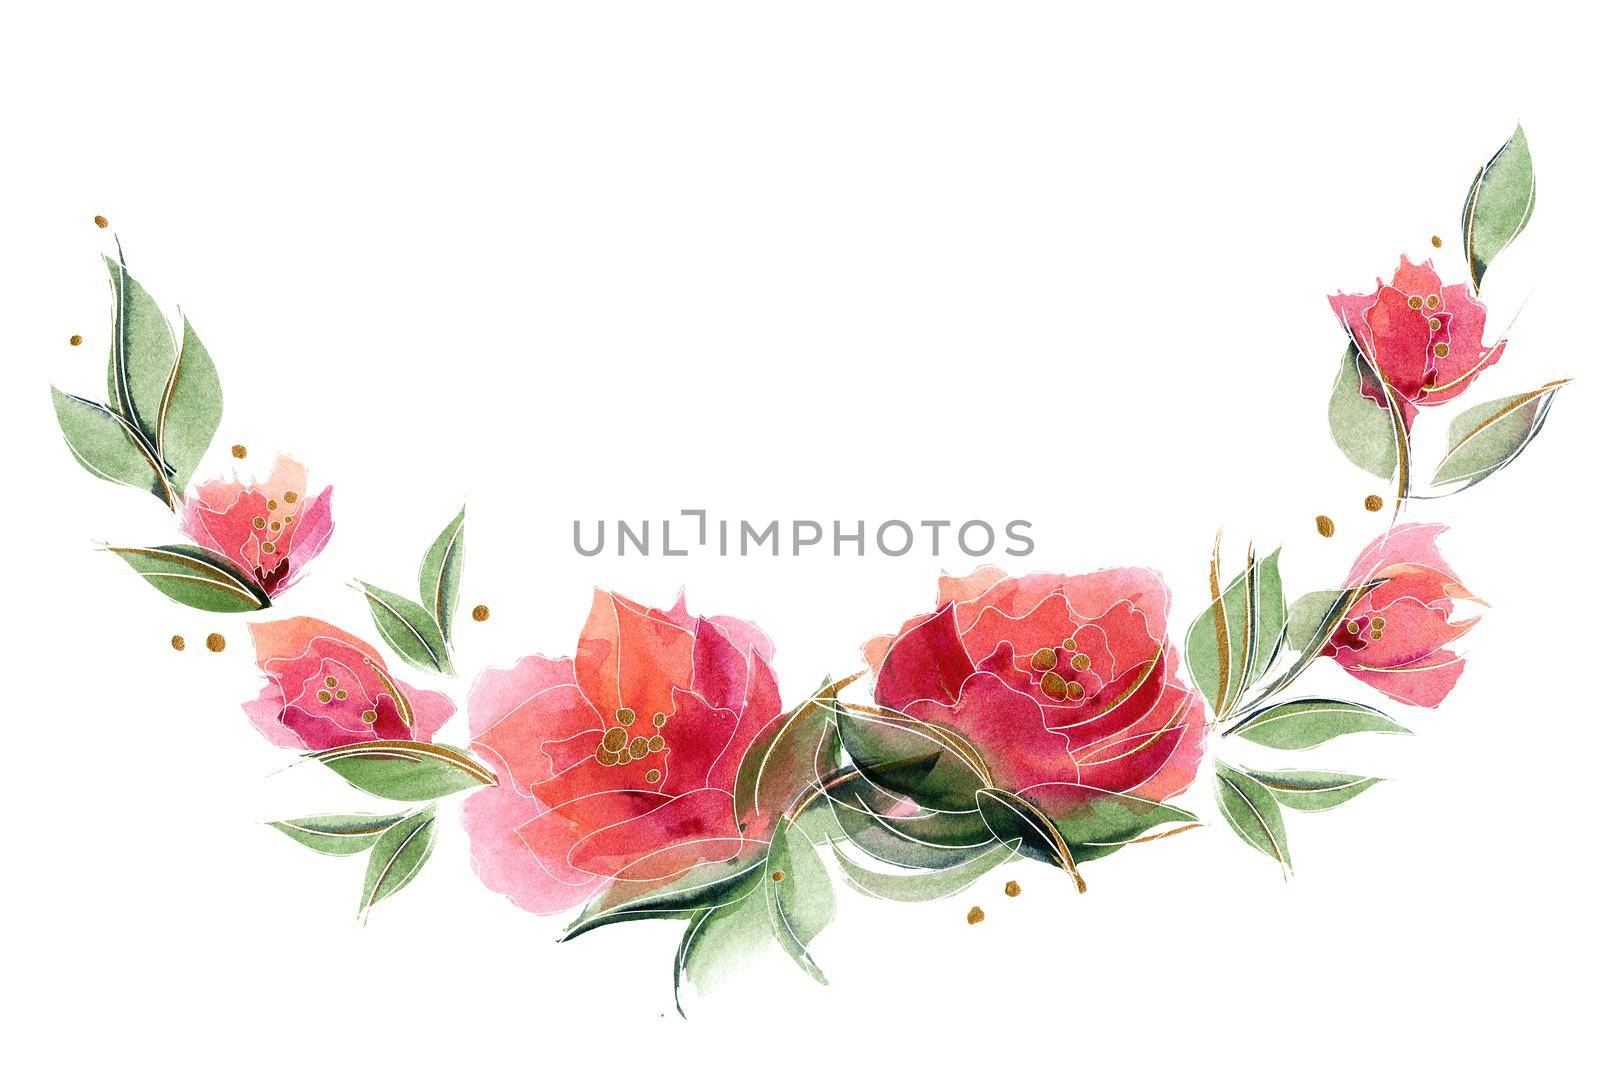 Pink floral ditsy rose garland. Spring mood with chaplet composition of watercolor delicate pink flowers